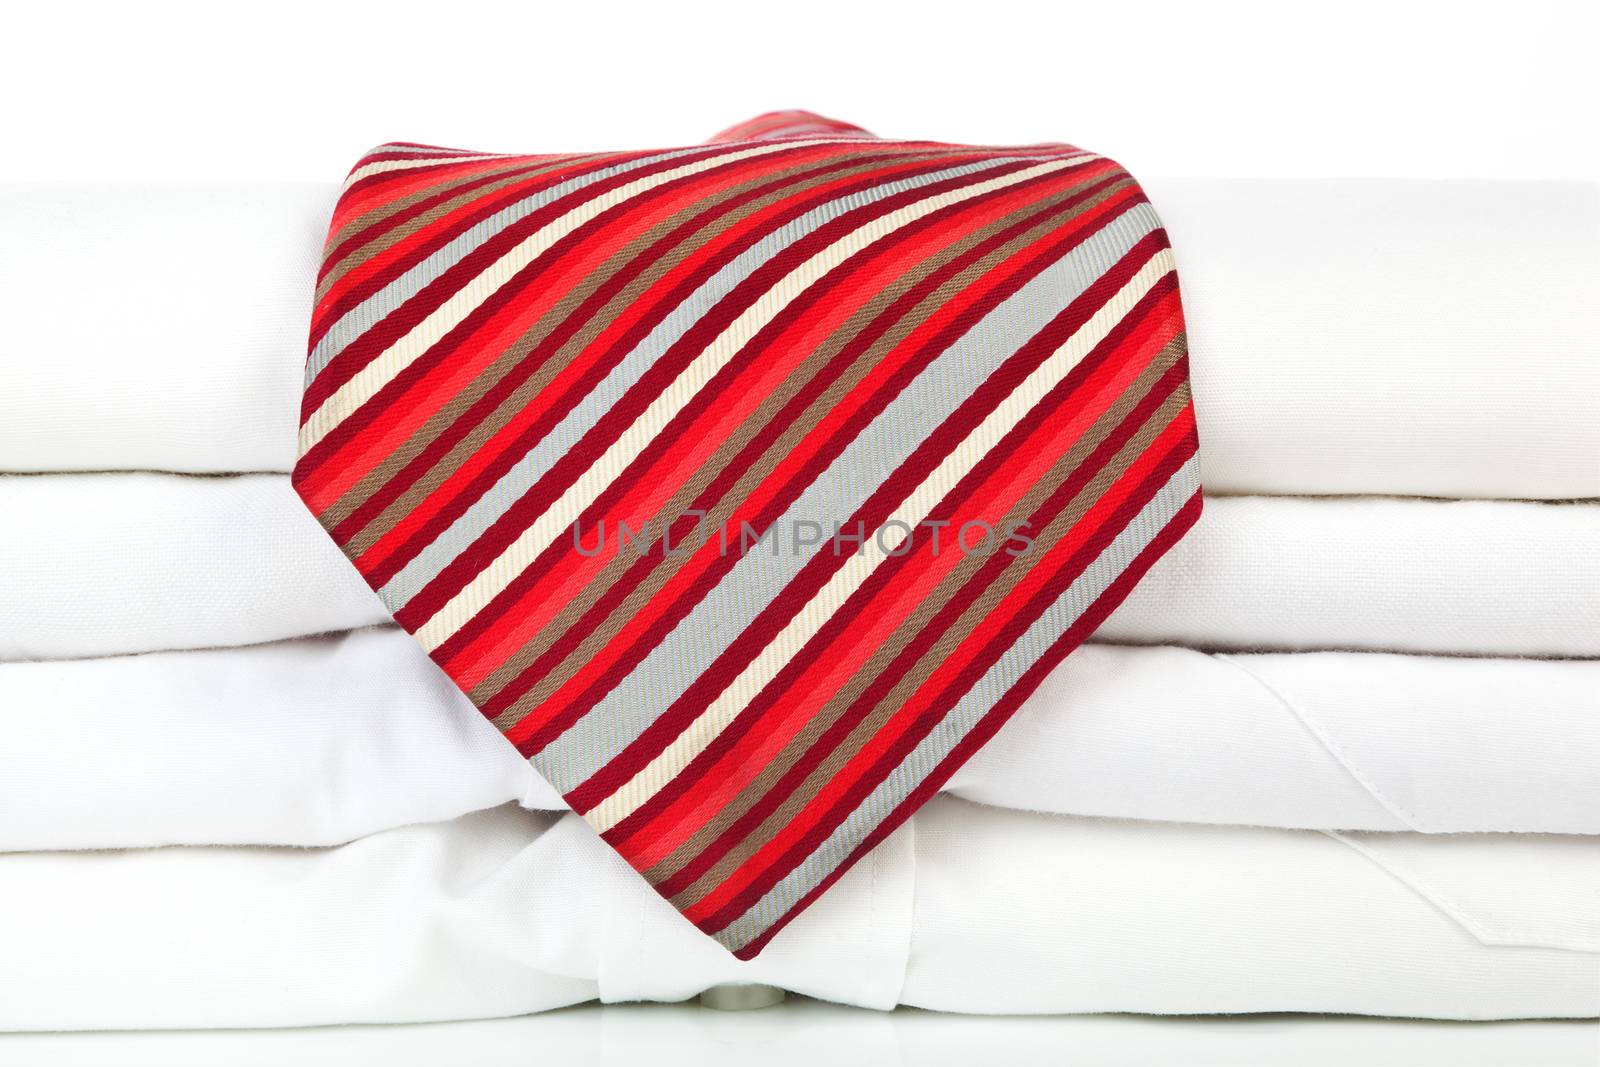 Pile of white business shirts with red striped tie on white background. Contemporary business concept.